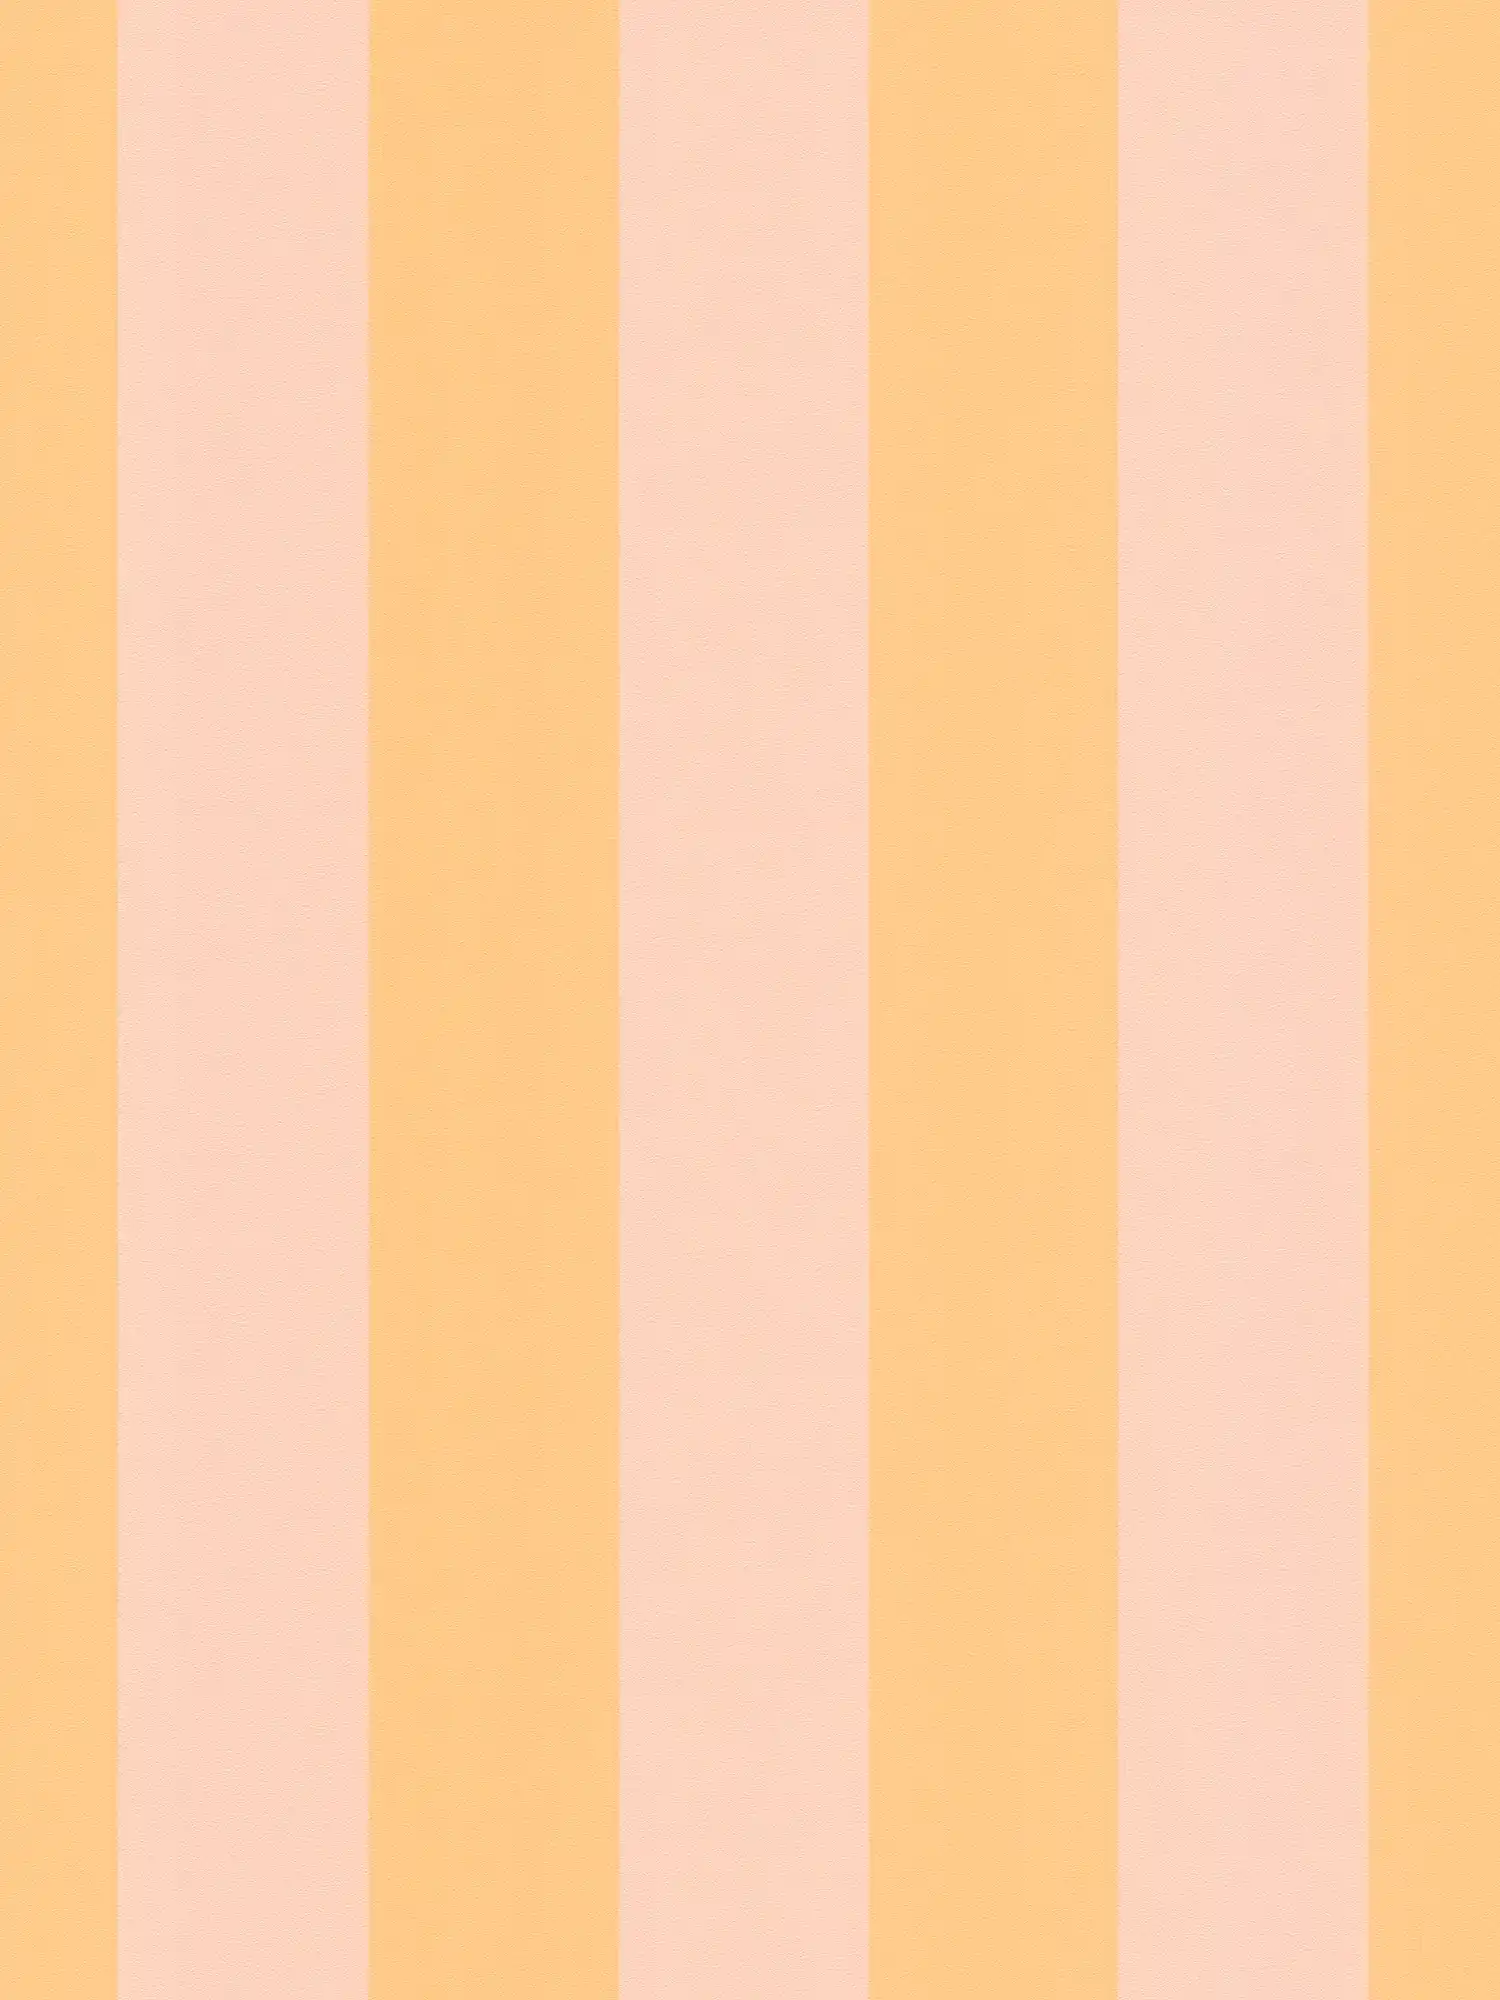         Non-woven wallpaper with block stripes in soft shades - orange, pink
    